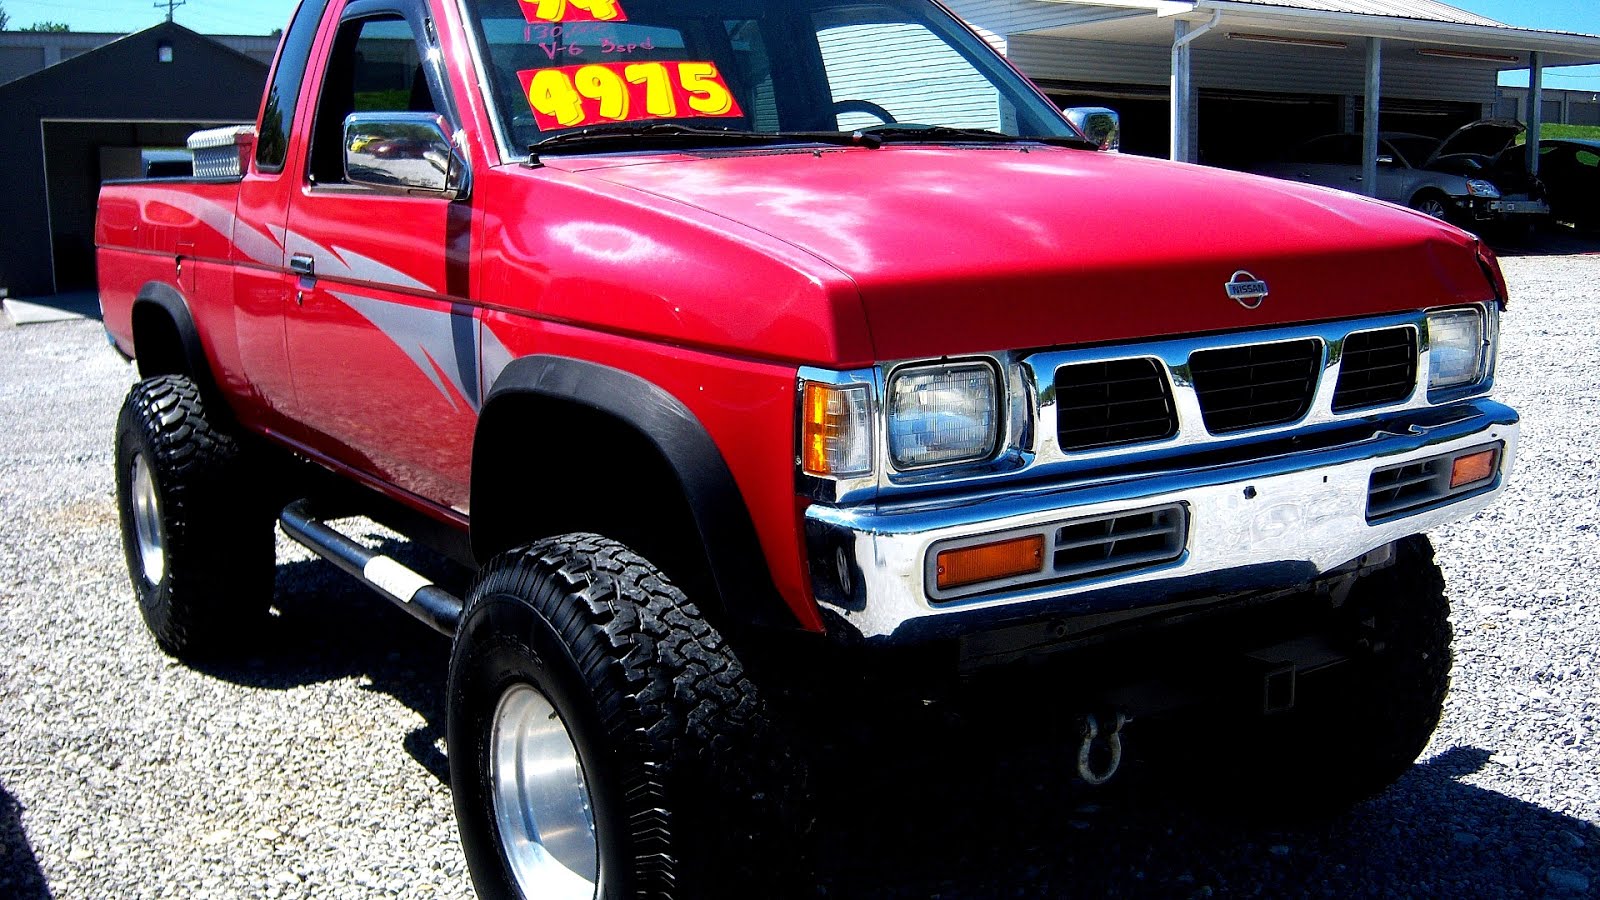 1990 Nissan Pickup Truck For Sale - Truck Choices